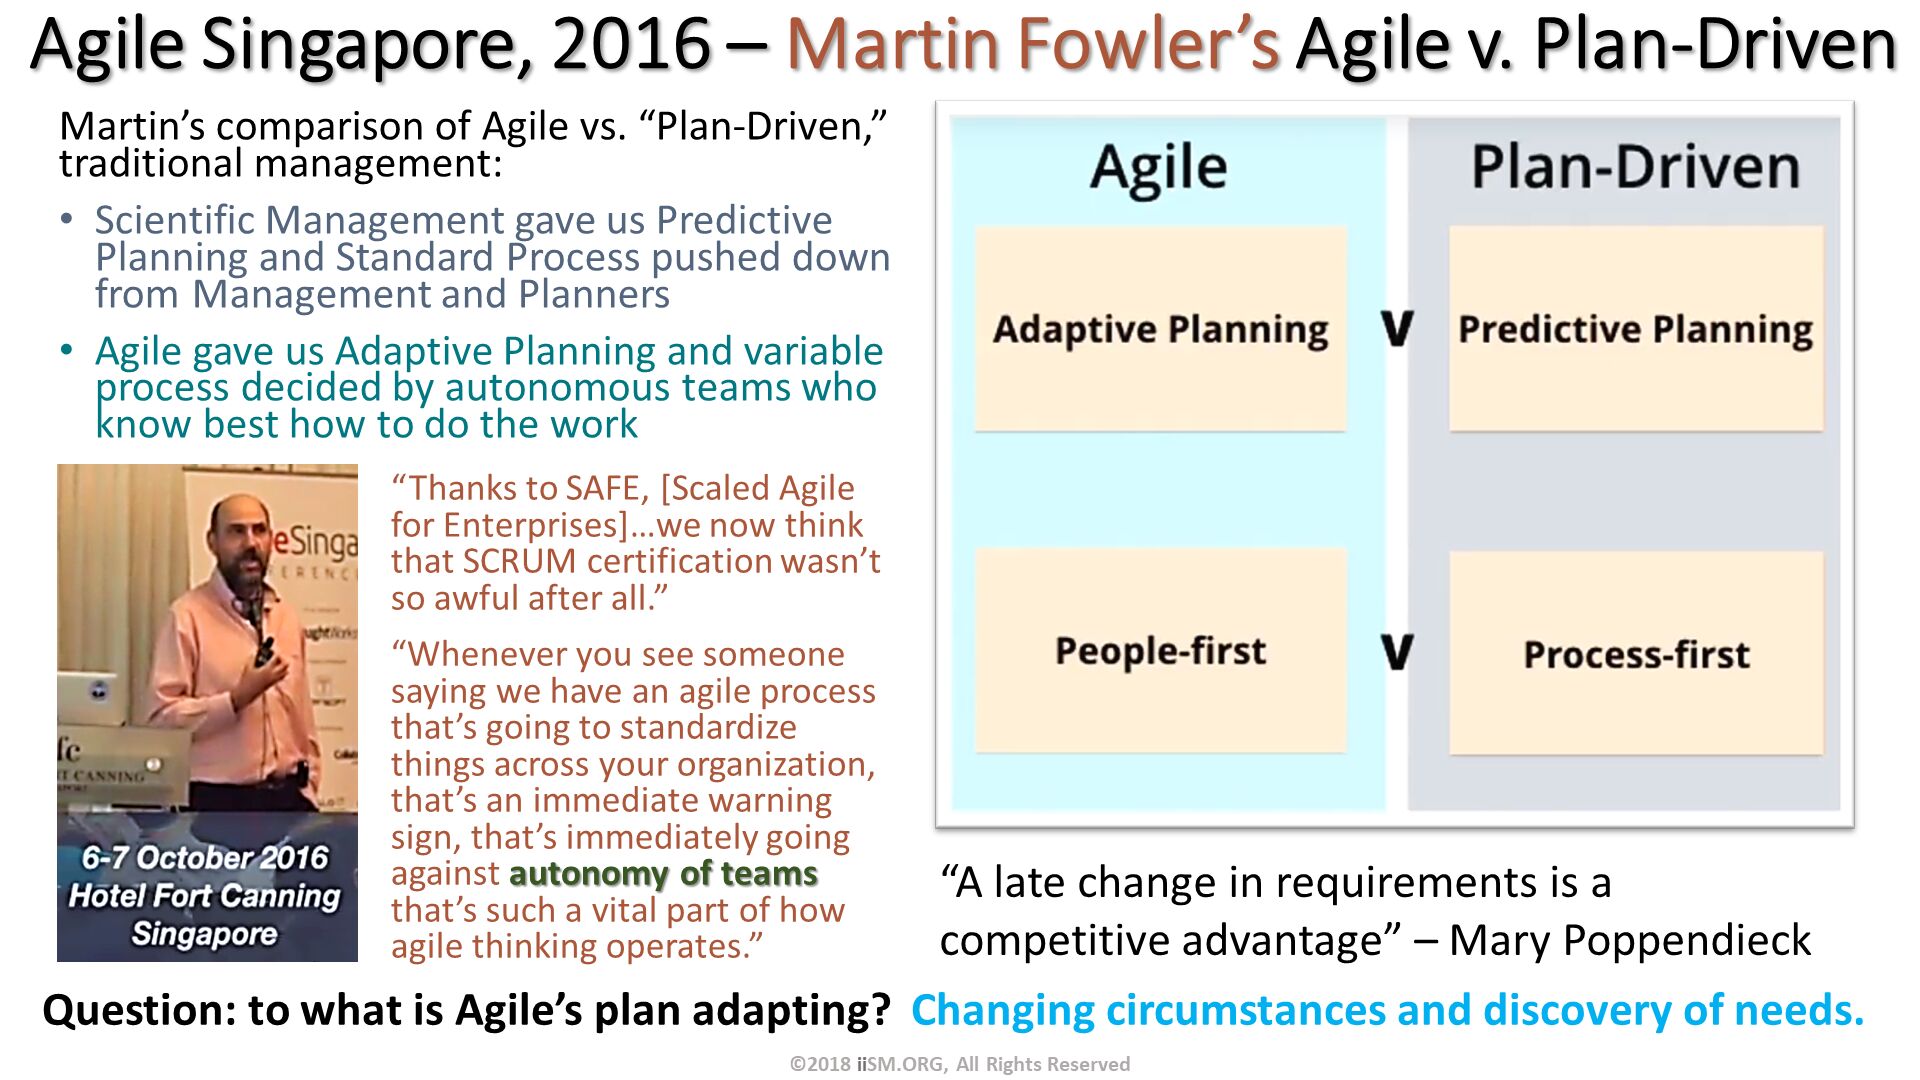 Martin’s comparison of Agile vs. “Plan-Driven,” traditional management:
Scientific Management gave us Predictive Planning and Standard Process pushed down from Management and Planners
Agile gave us Adaptive Planning and variable process decided by autonomous teams who know best how to do the work. Agile Singapore, 2016 – Martin Fowler’s Agile v. Plan-Driven. “Thanks to SAFE, [Scaled Agile for Enterprises]…we now think that SCRUM certification wasn’t so awful after all.”
“Whenever you see someone saying we have an agile process that’s going to standardize things across your organization, that’s an immediate warning sign, that’s immediately going against autonomy of teams that’s such a vital part of how agile thinking operates.”. “A late change in requirements is a competitive advantage” – Mary Poppendieck. ©2018 iiSM.ORG, All Rights Reserved. Question: to what is Agile’s plan adapting?  Changing circumstances and discovery of needs. 